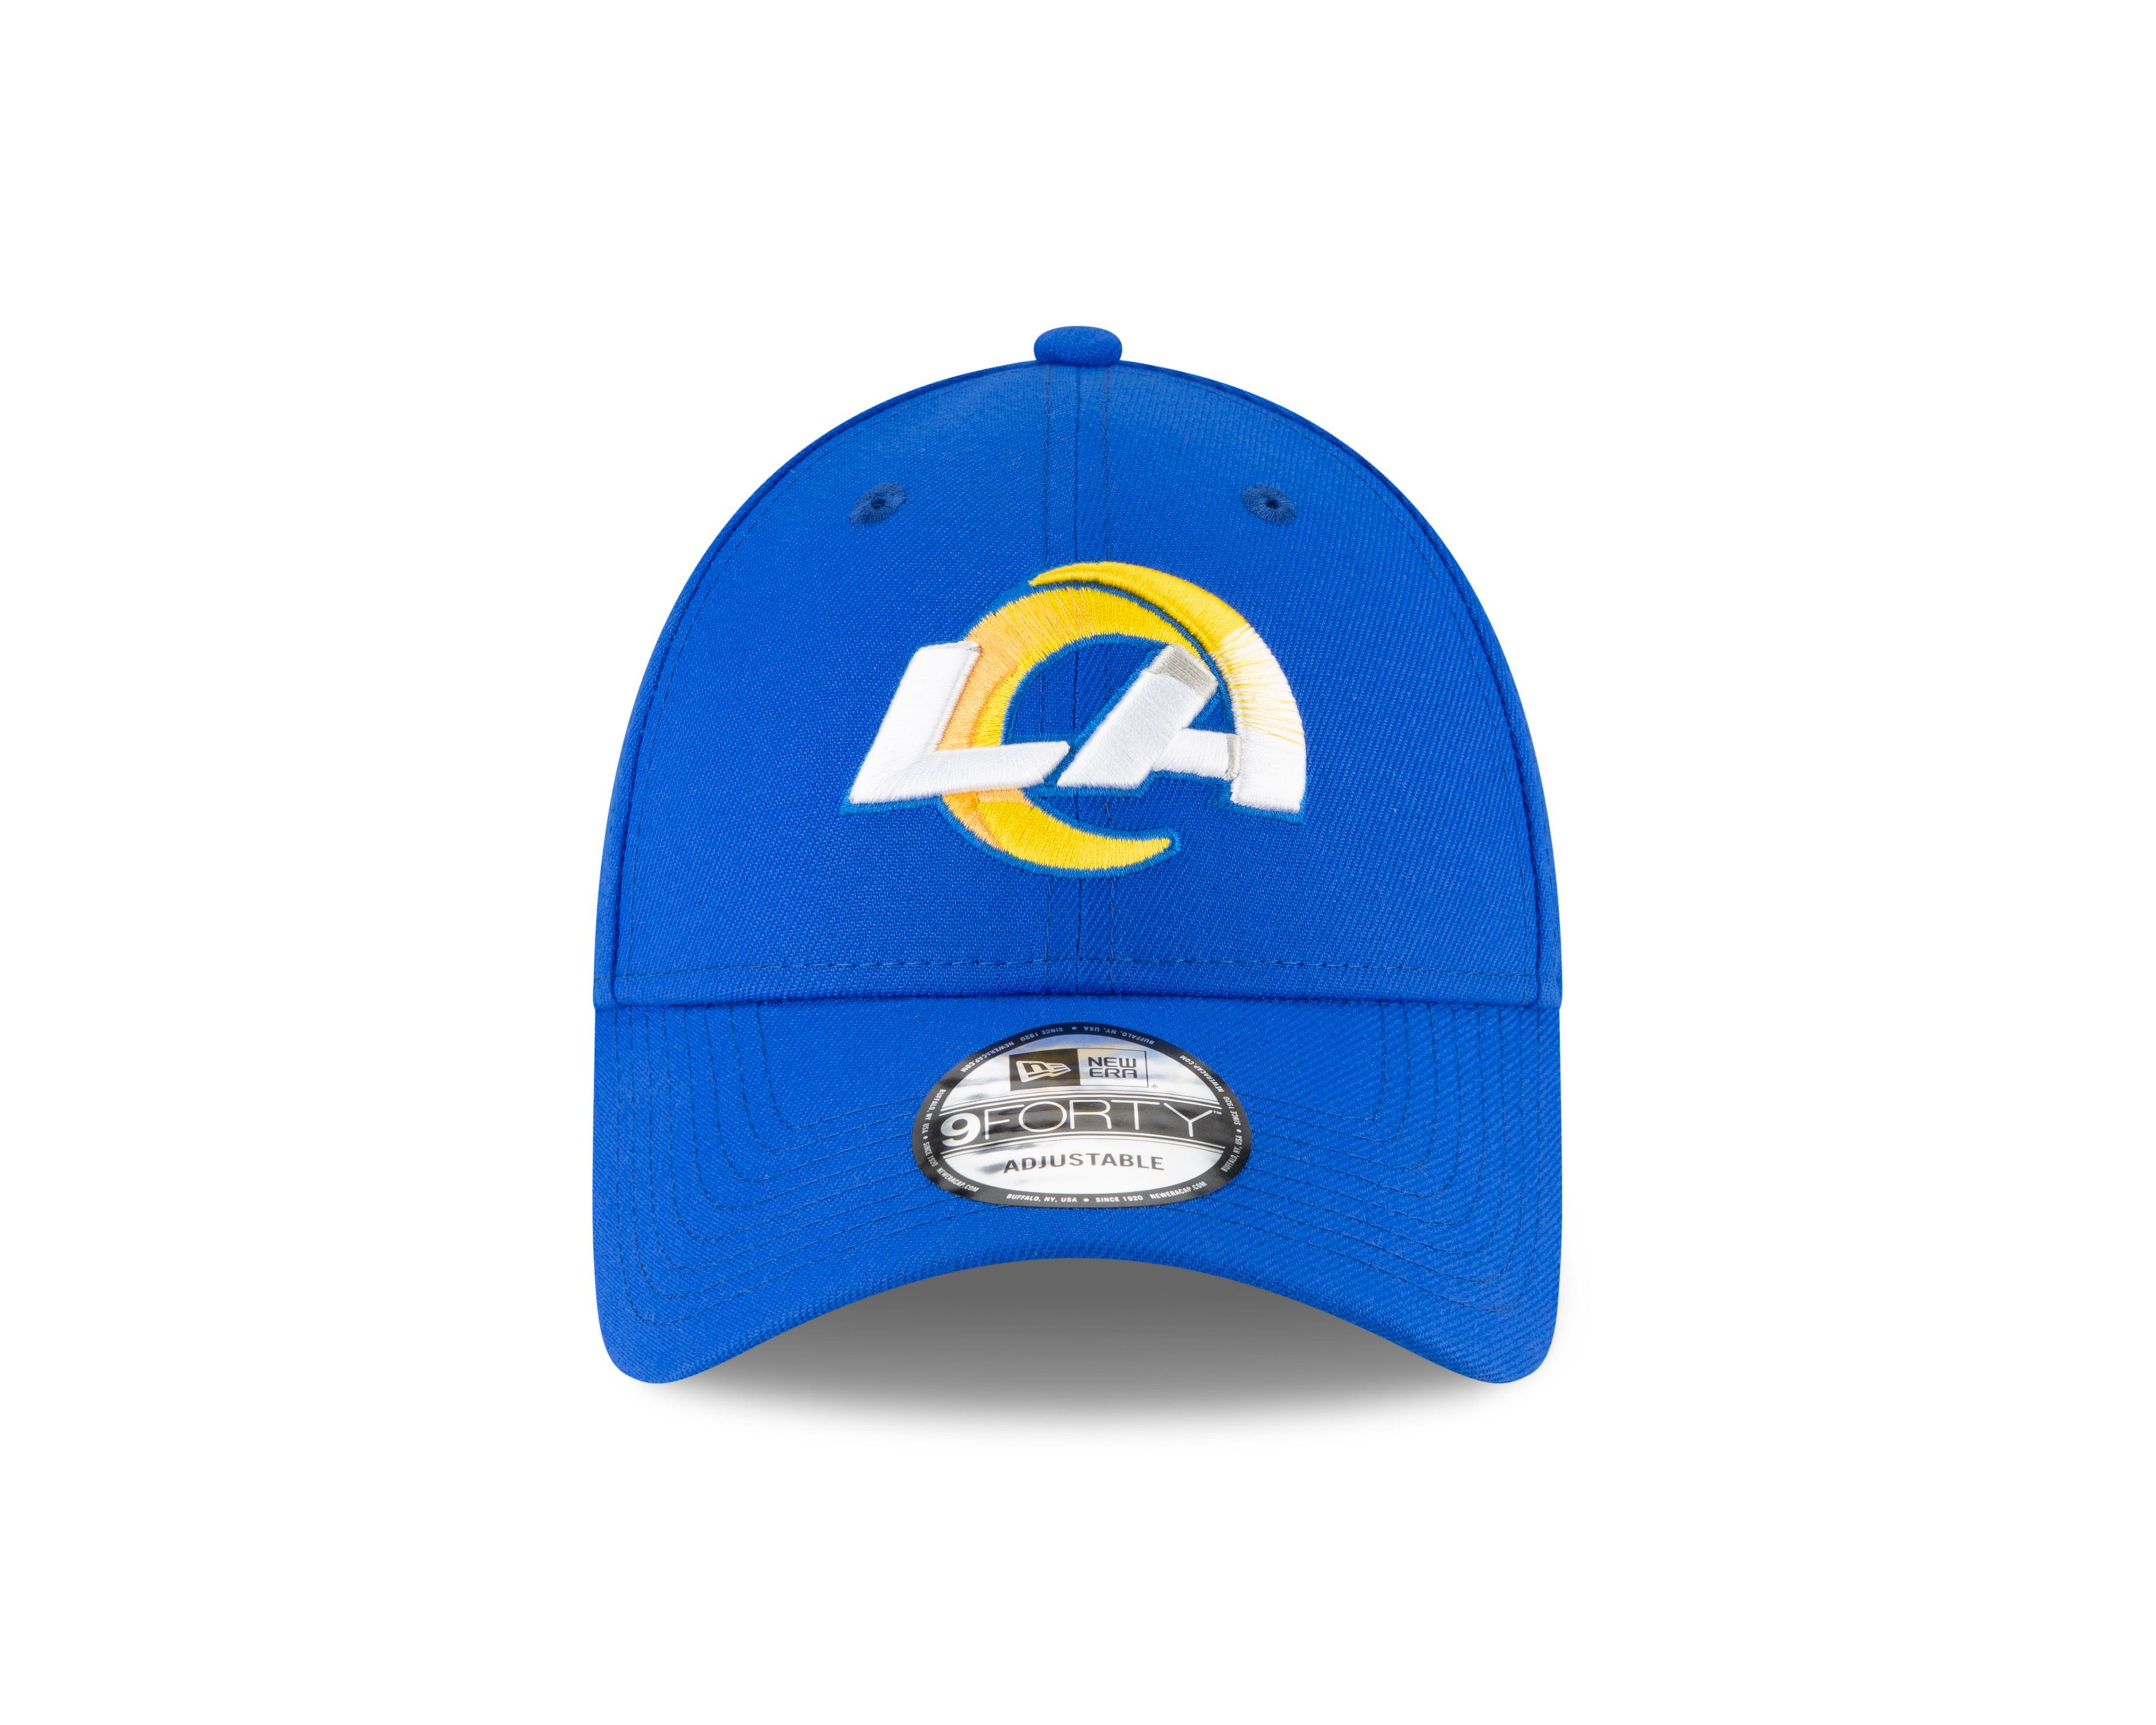 Los Angeles Rams NFL The League Blue 9Forty Adjustable Cap New Era